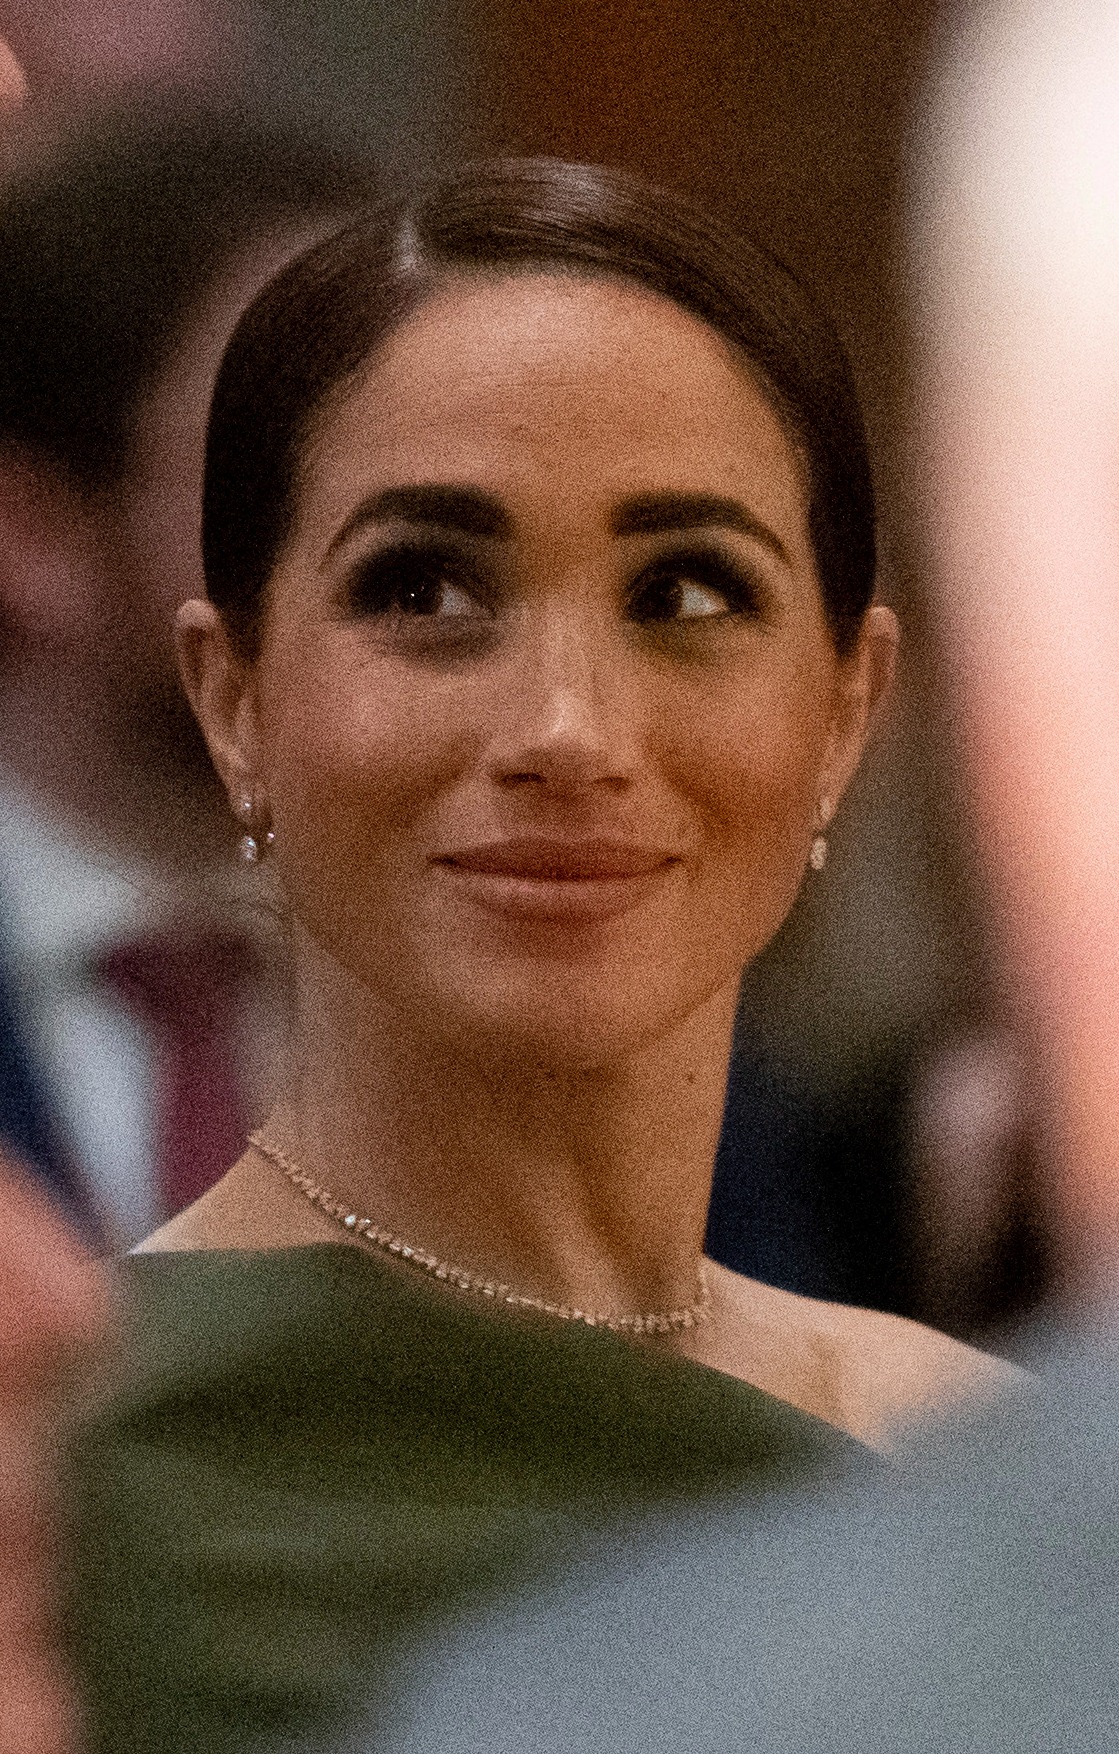 Meghan Markle Stuns in £12,500 Diamond Necklace at Canada Banquet